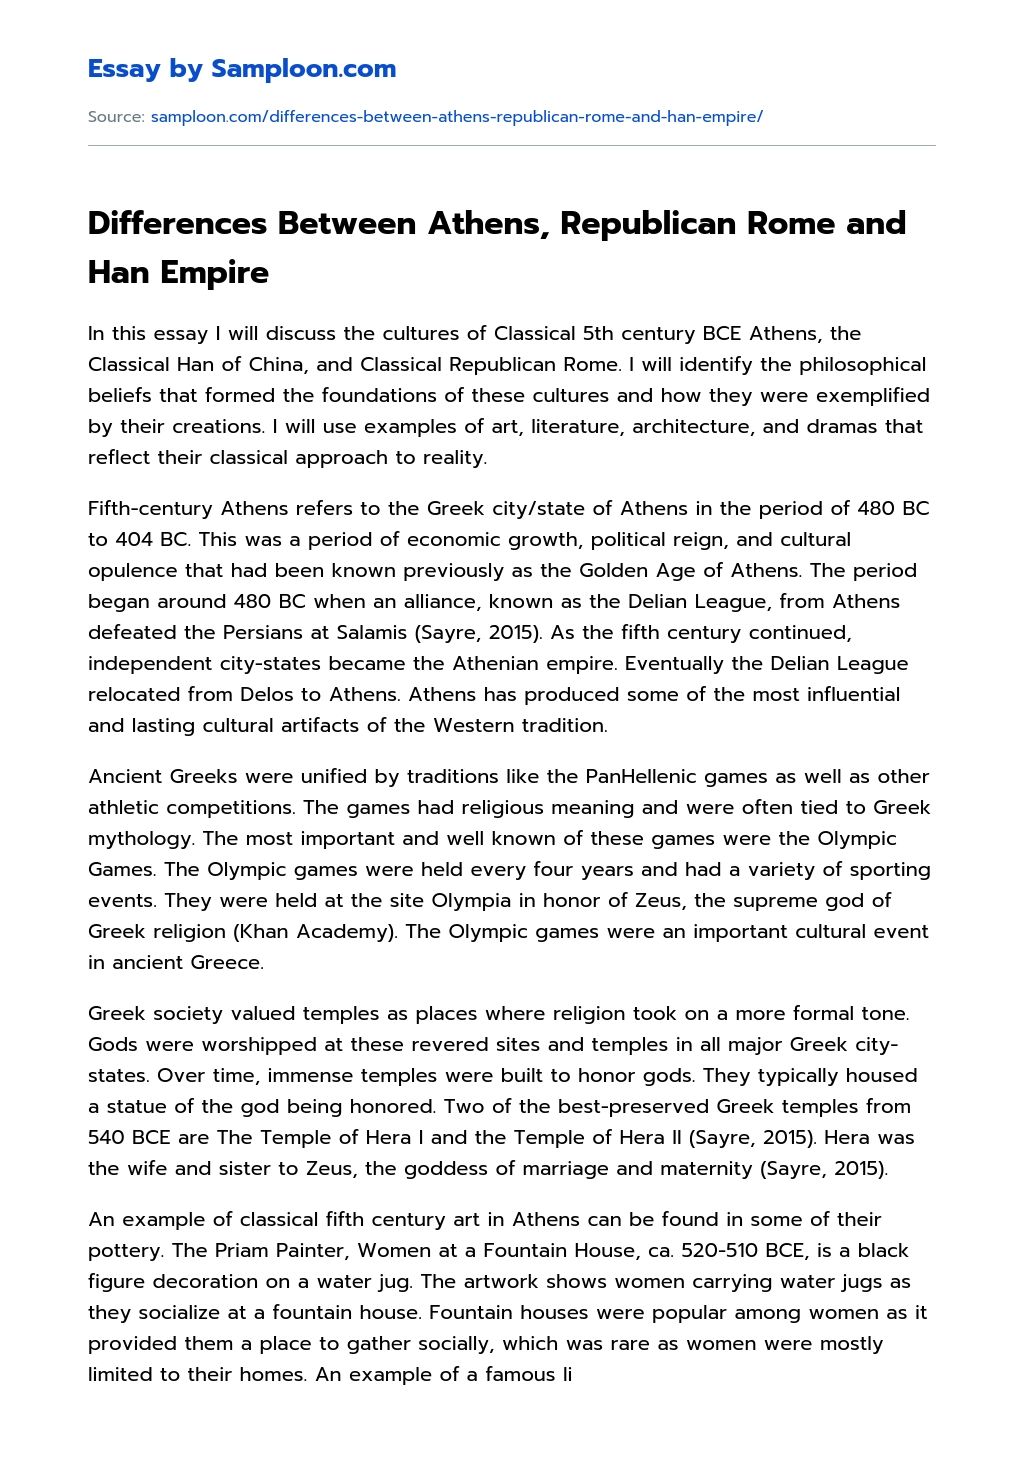 Differences Between Athens, Republican Rome and Han Empire essay